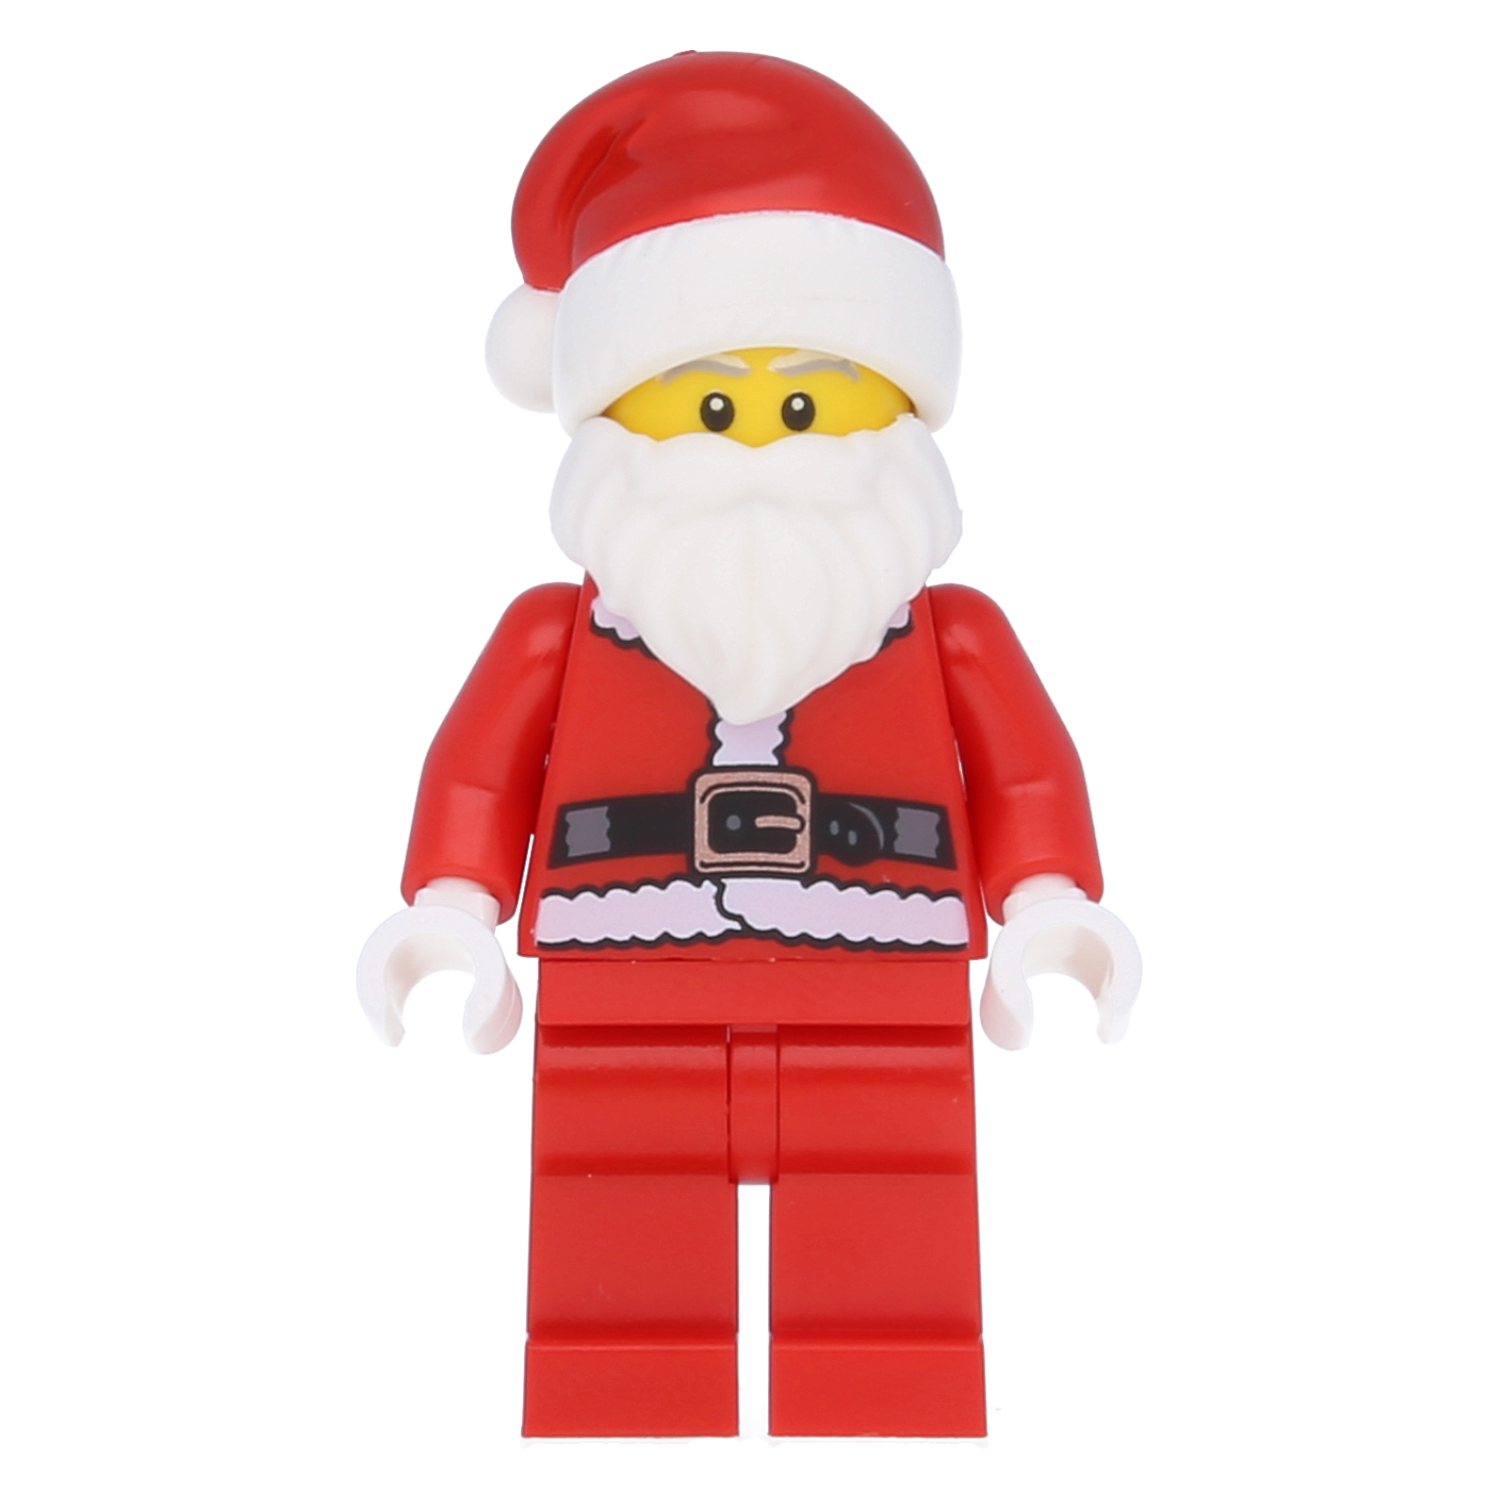 LEGO Minifigure - Santa Claus with Bart and hat (series 8)